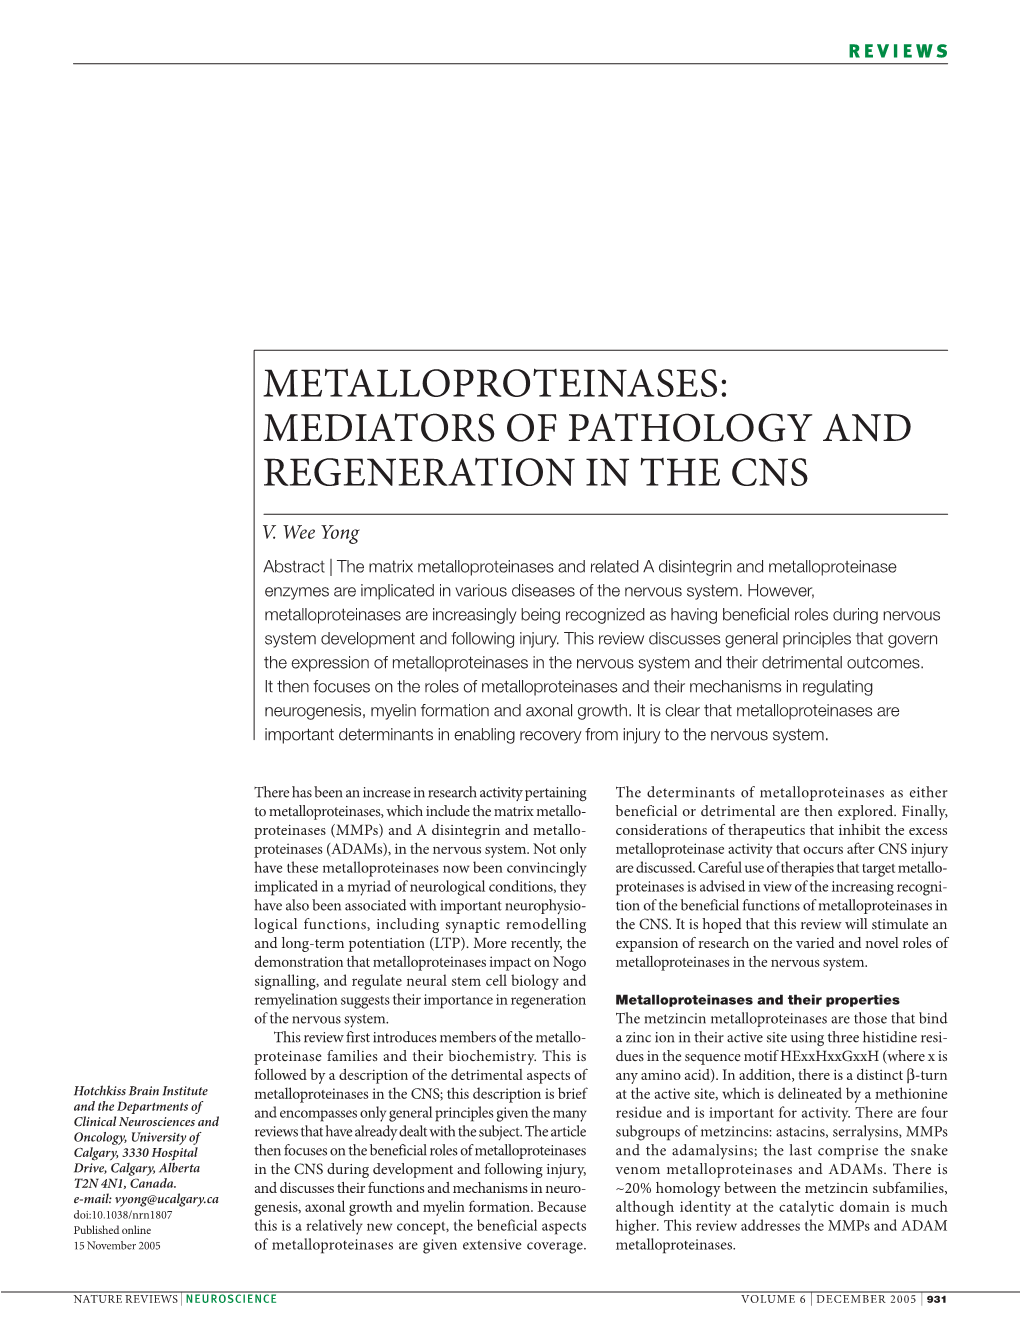 Metalloproteinases: Mediators of Pathology and Regeneration in the Cns